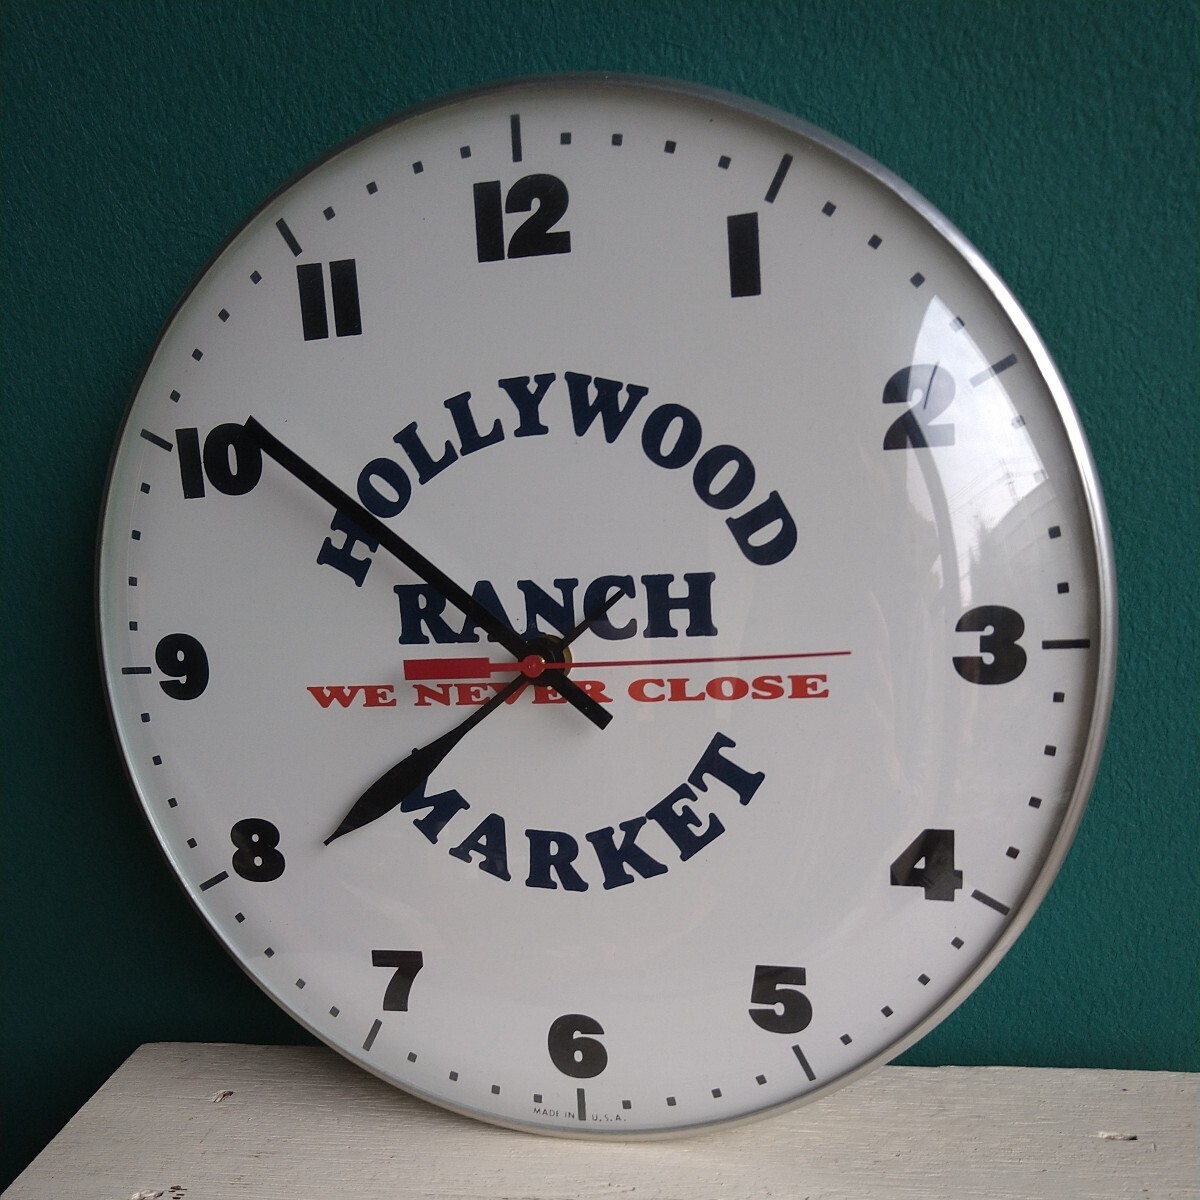 HOLLYWOOD RANCH MARKET 壁掛け時計　MADE IN U.S.A.